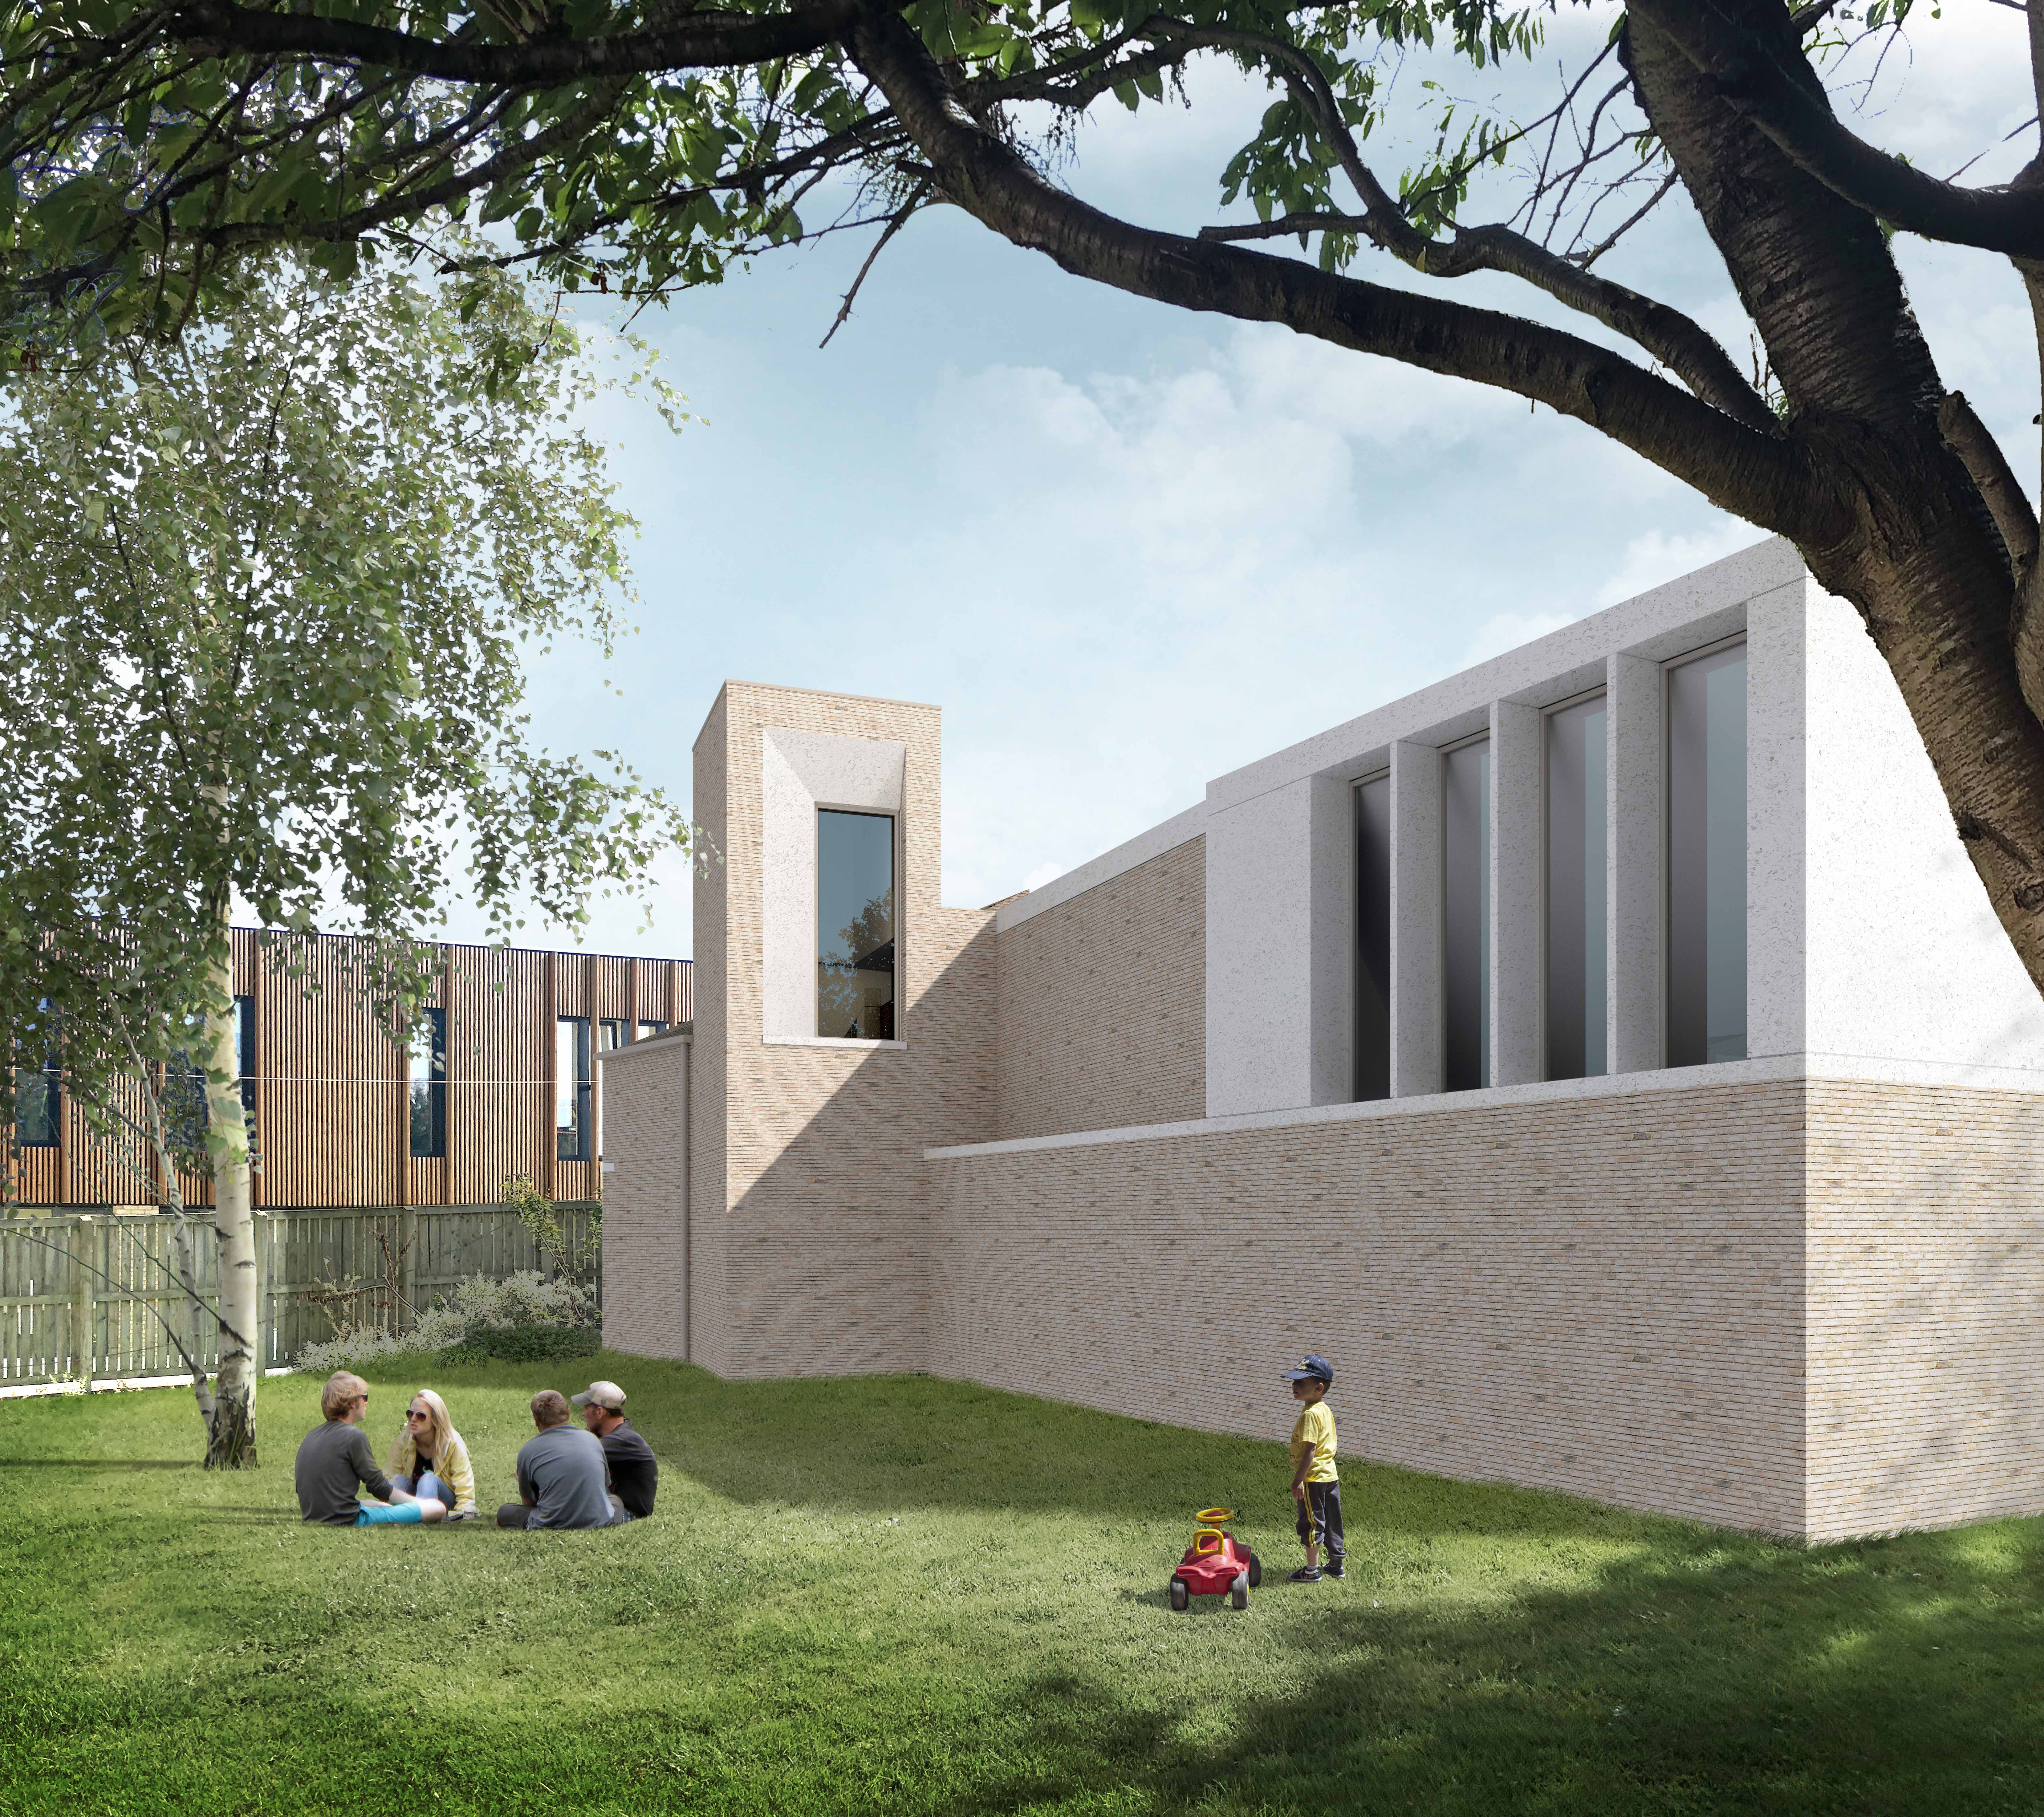 Detailed plans lodged for Craigmillar wellbeing facility